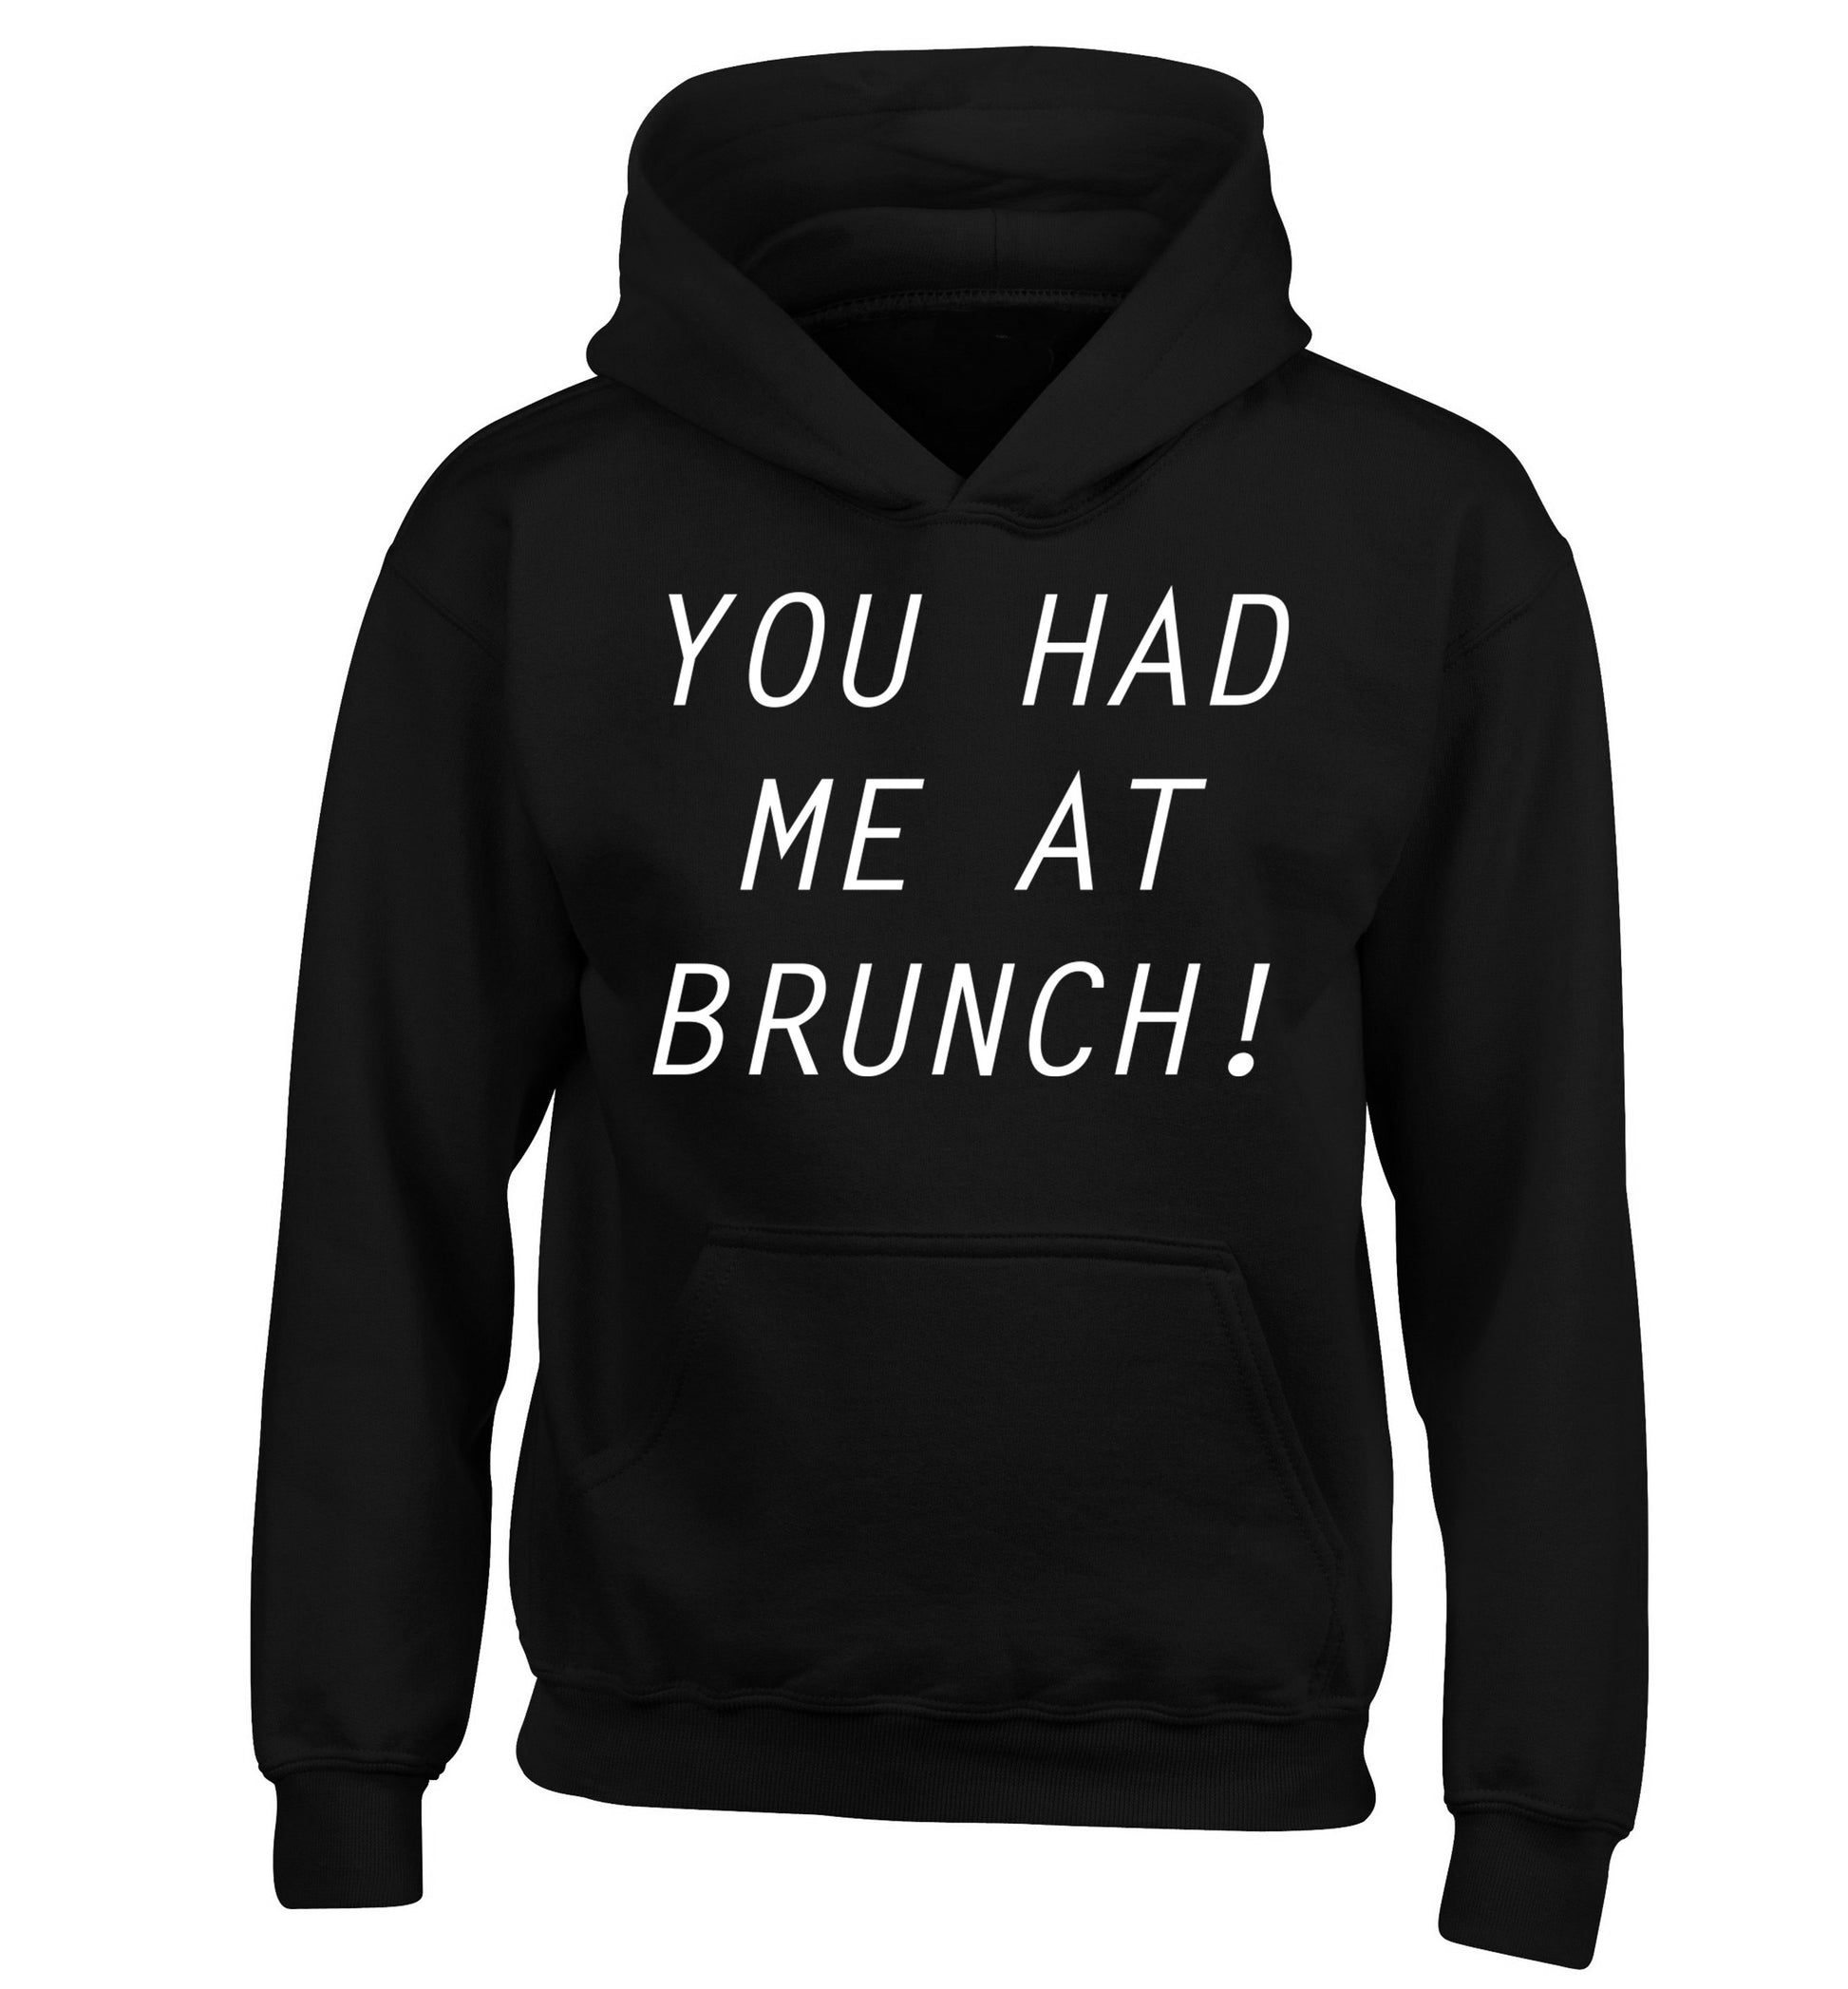 You had me at brunch children's black hoodie 12-14 Years